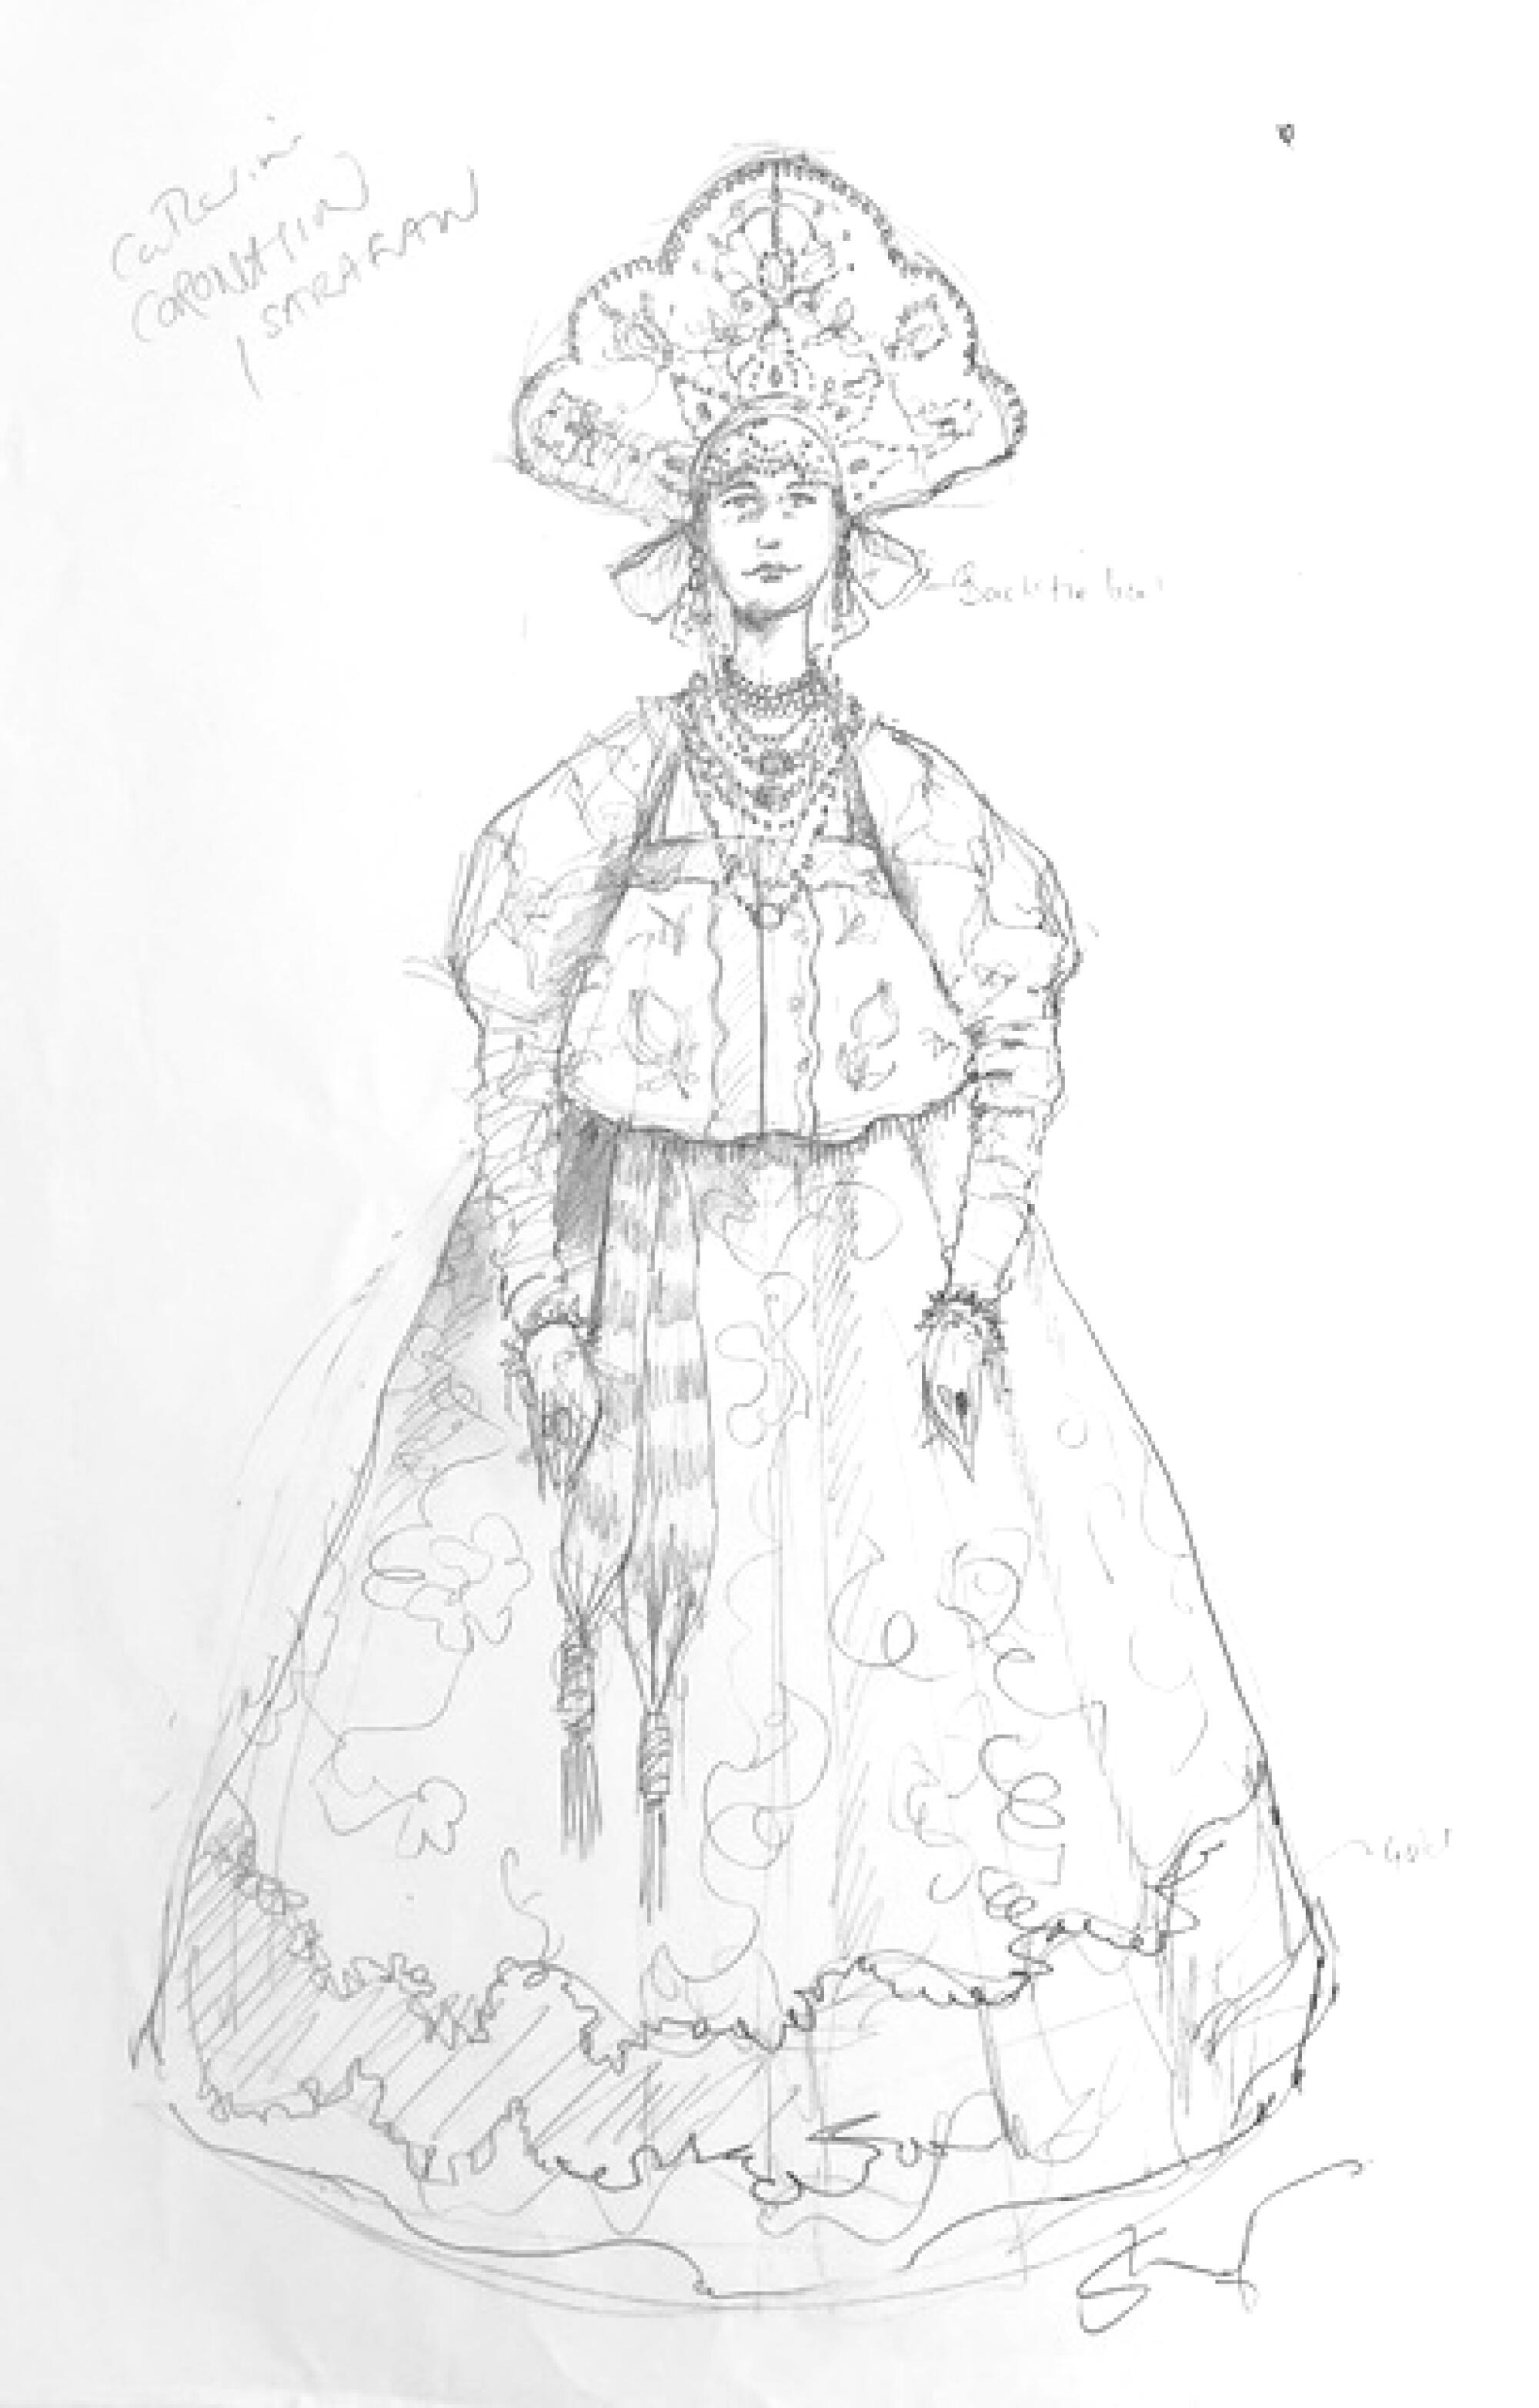 A sketch of a period gown.